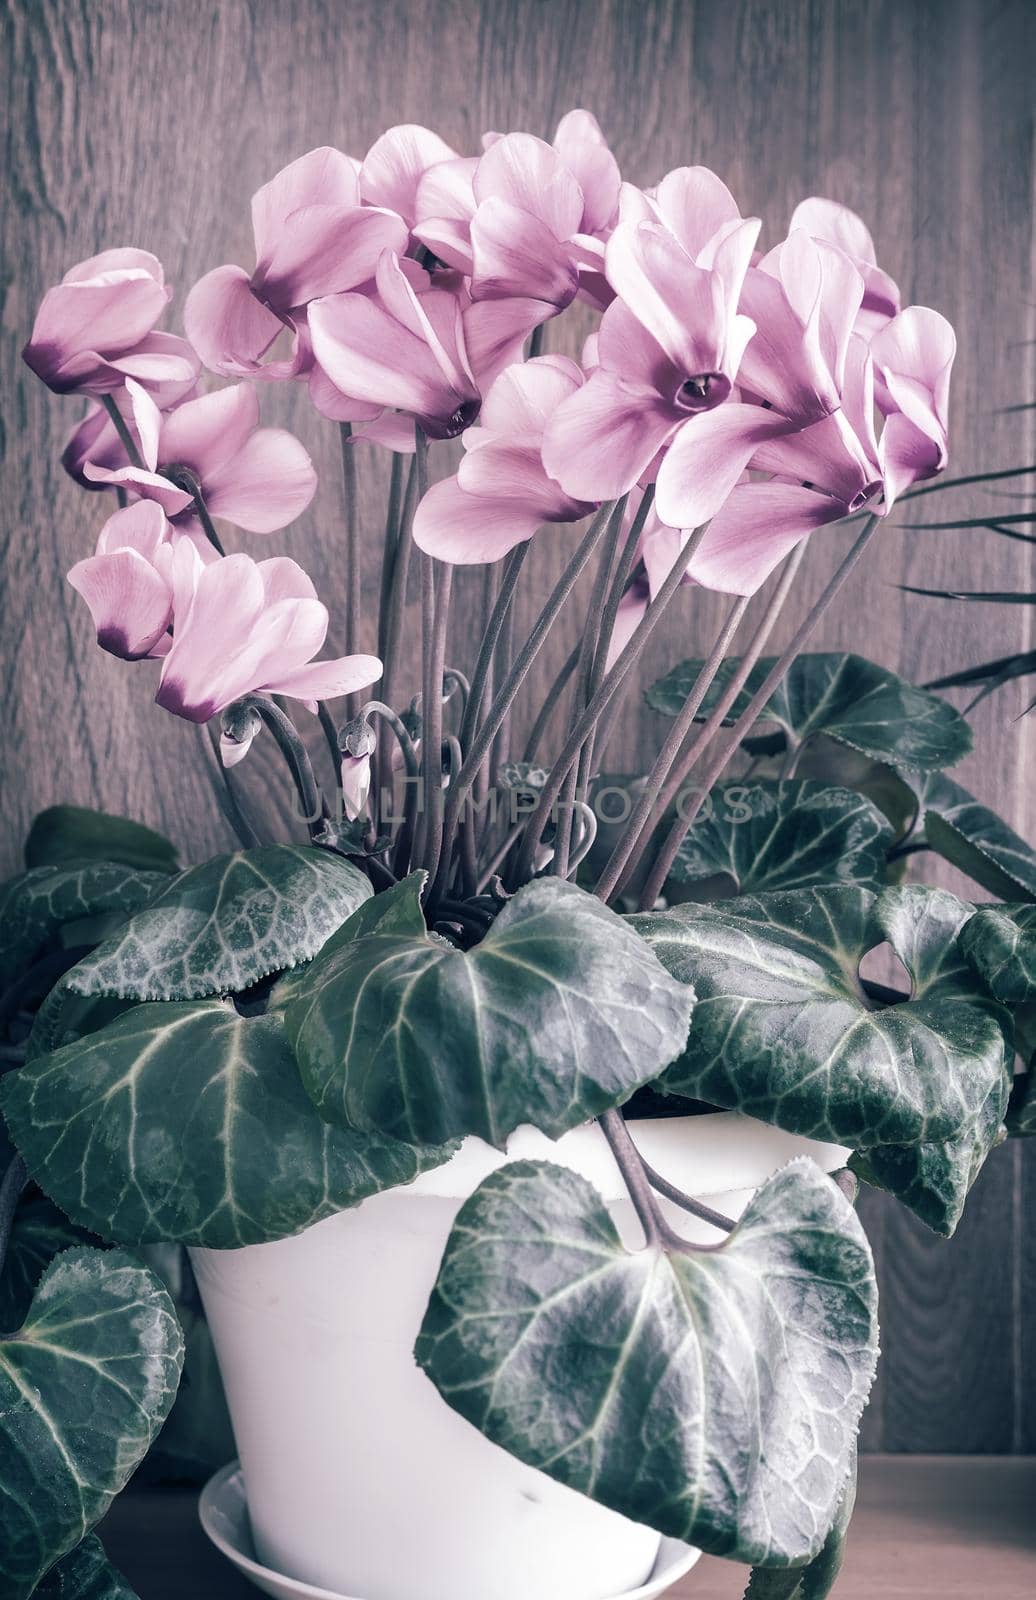 Flowering cyclamen with flowers and green leaves. by georgina198